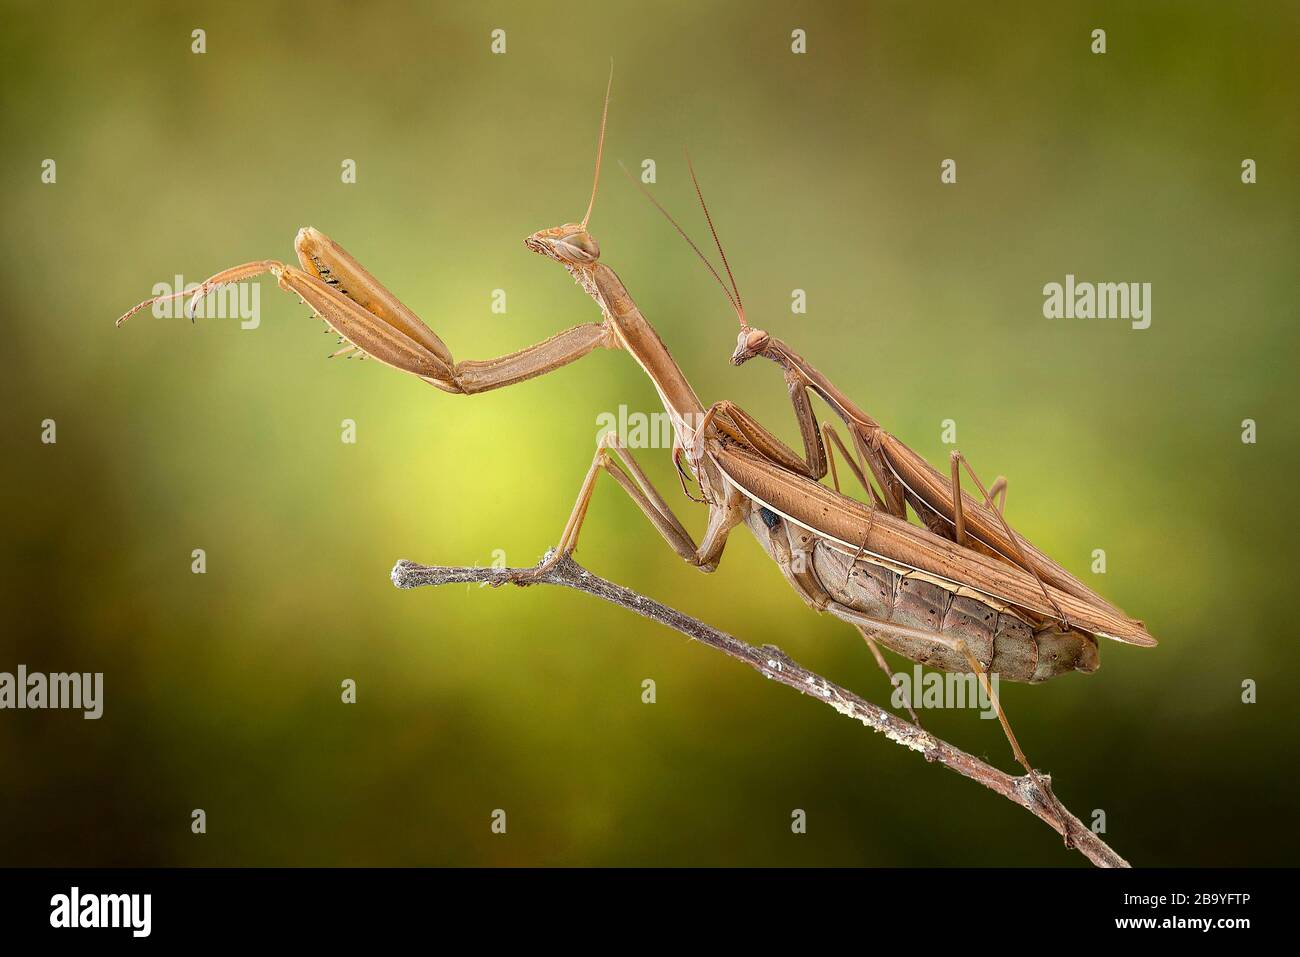 Praying mantis in a forest near the Po river in northern Italy, Luzzara, Emilia Romagna, Italy, Europe Stock Photo